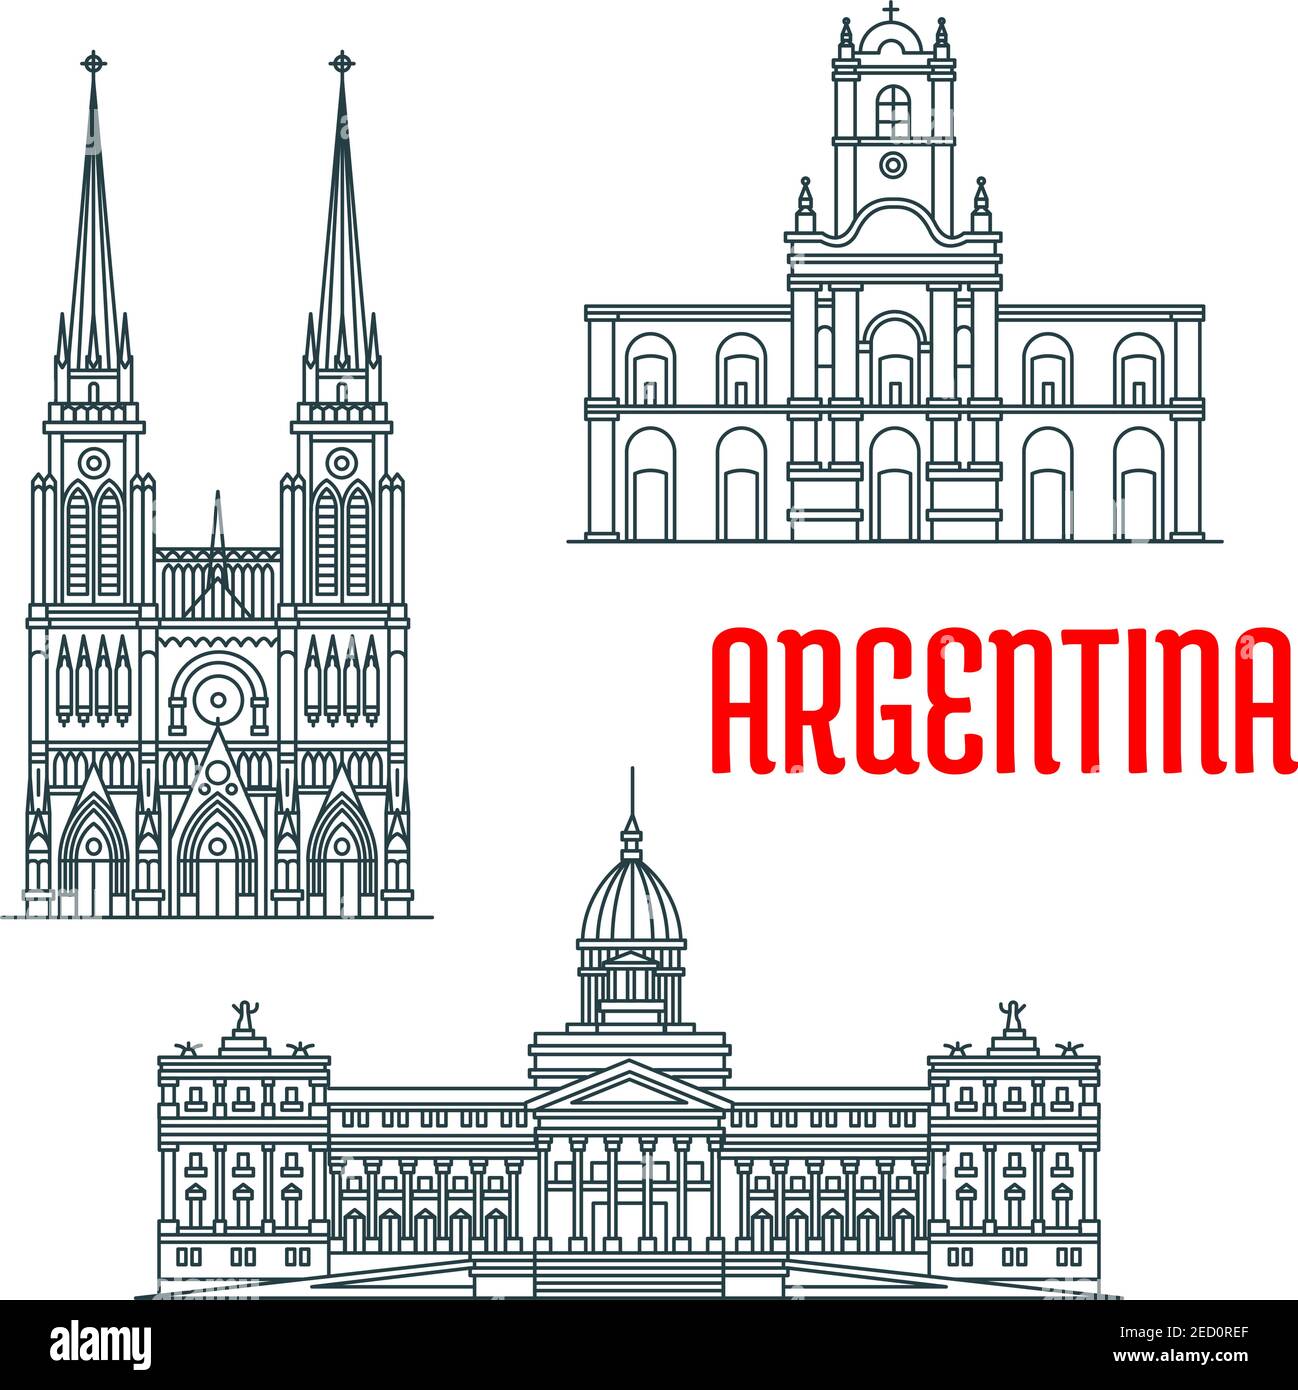 Argentina famous buildings vector facades. Basilica of Our Lady of Lujan, Buenos Aires Cabildo, Palace of the Argentine National Congress. Historic re Stock Vector